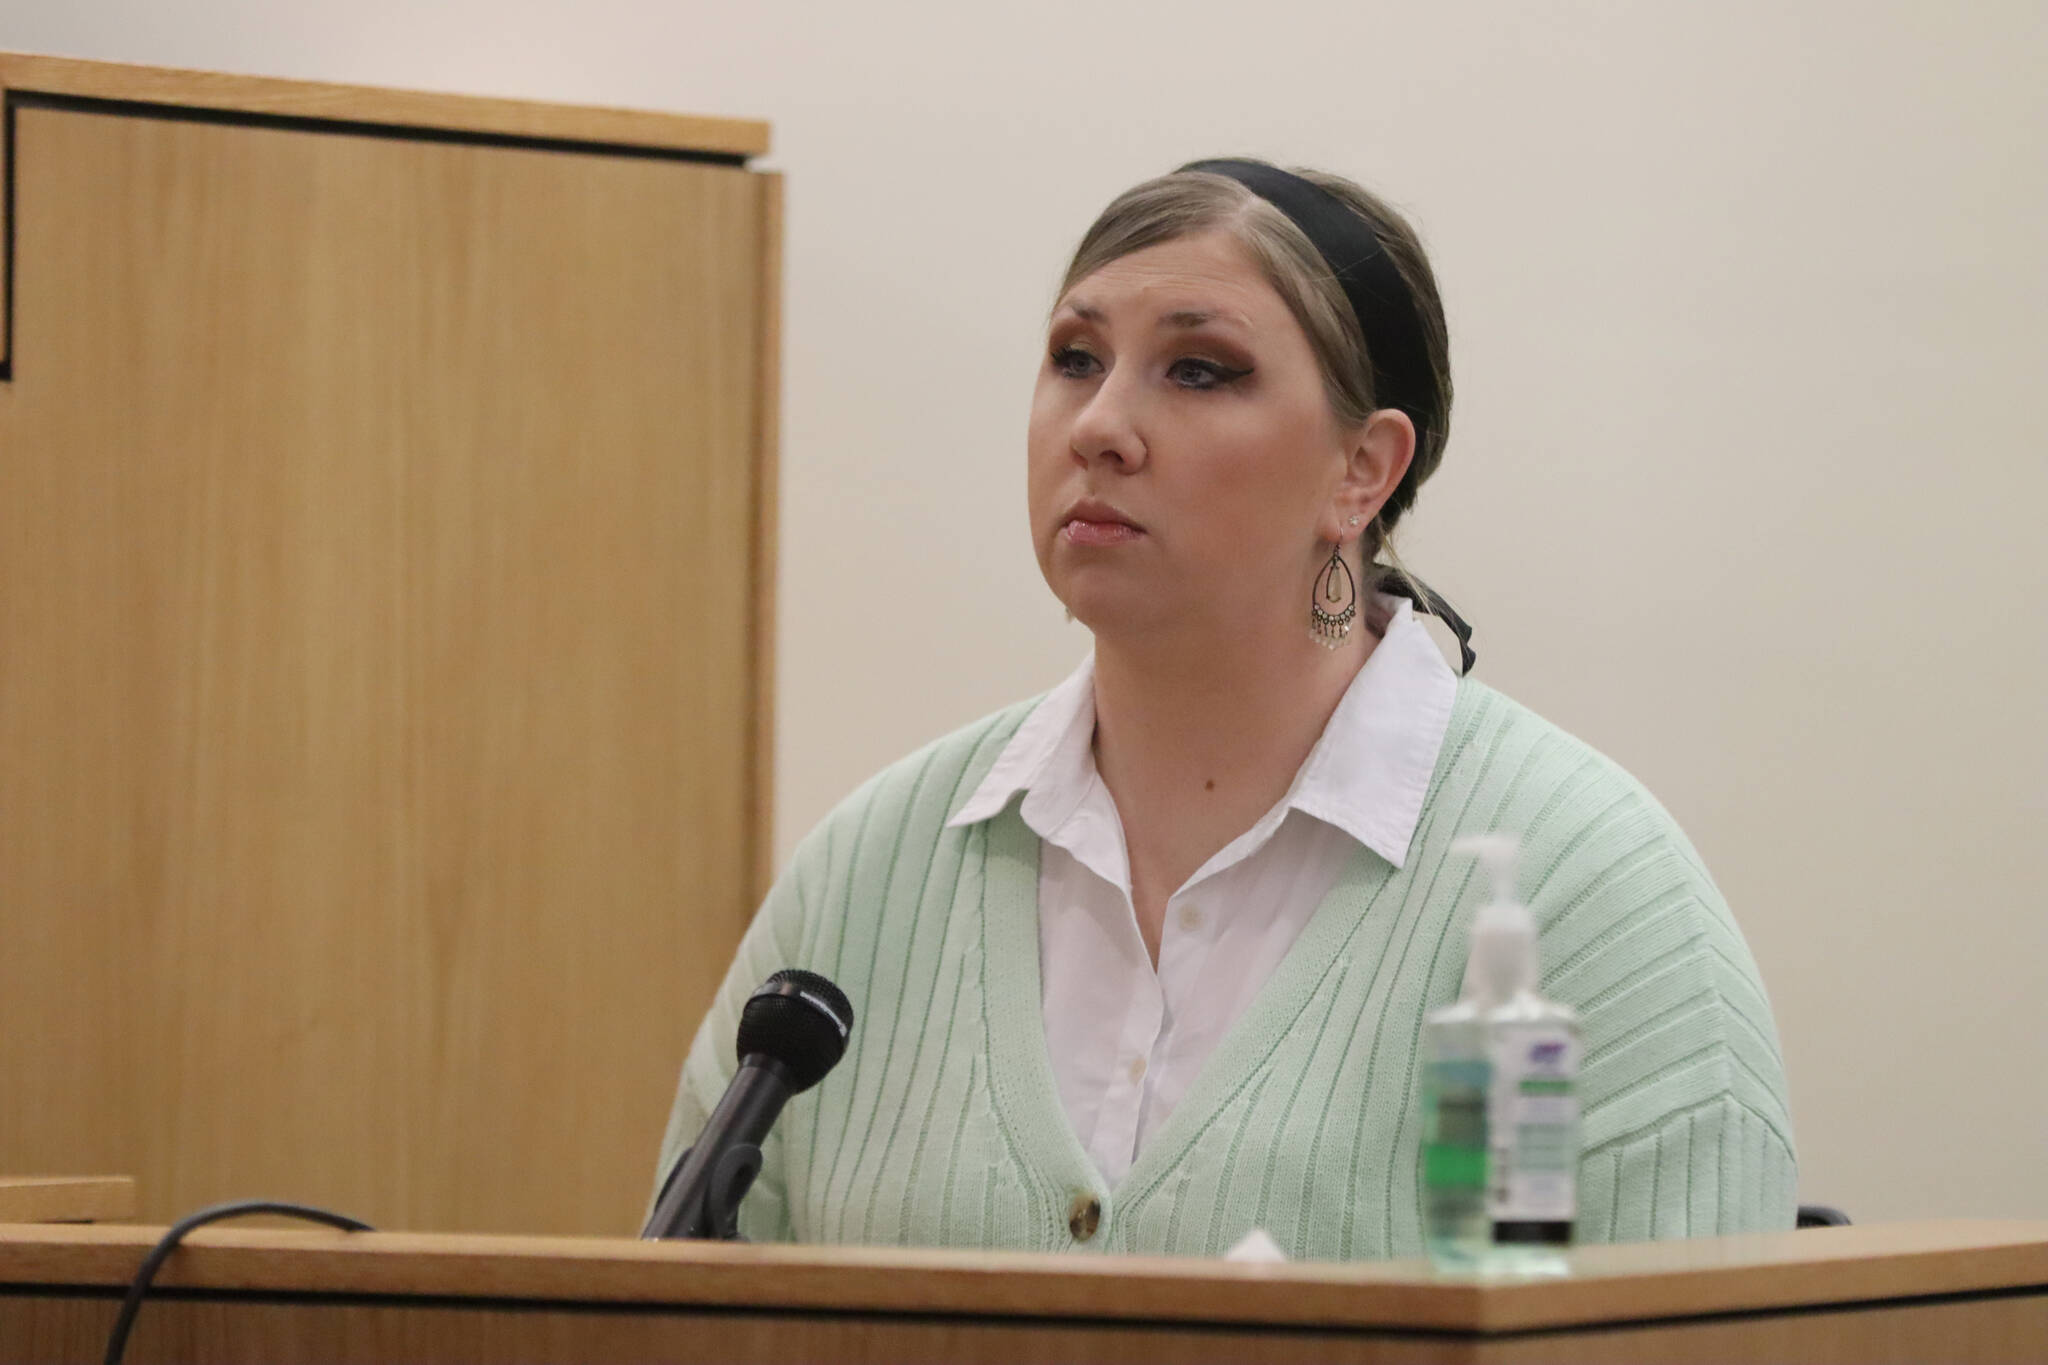 photos by Jonson Kuhn / Juneau Empire
Jennifer Traver takes the witness stand on Monday to testify to the innocence of her husband Jason Traver who was being tried by the state for second-degree assault against his wife. Jennifer Traver has maintained that the injuries she suffered back in September 2019 were the result of consensual BDSM.